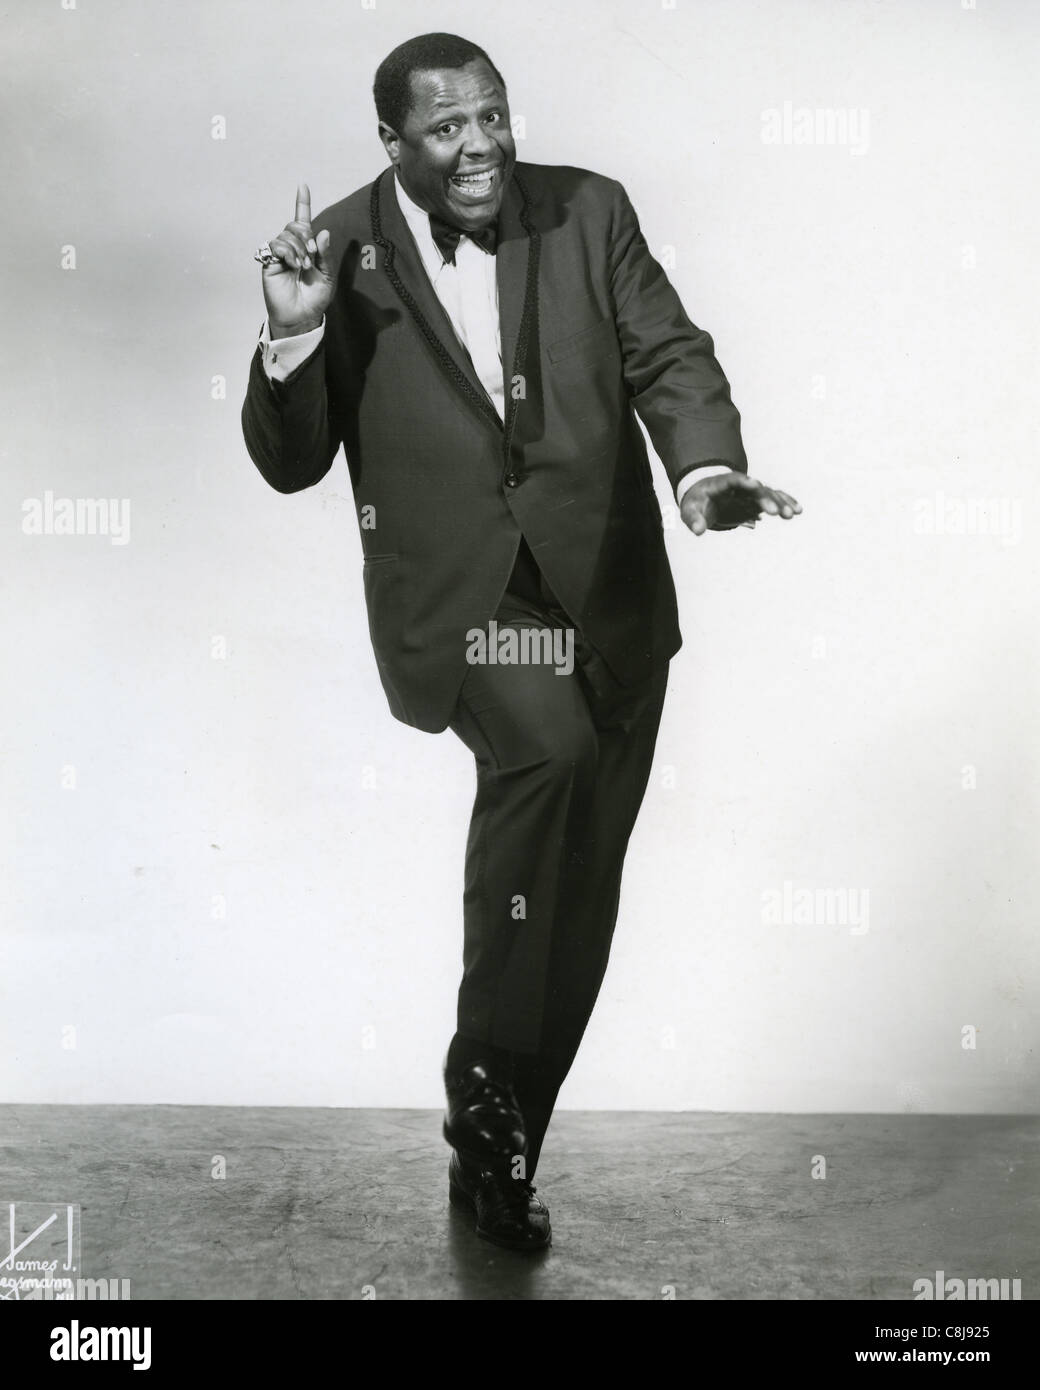 GEORGE KIRBY (1923-1995) Promotional photo of US comedian, singer